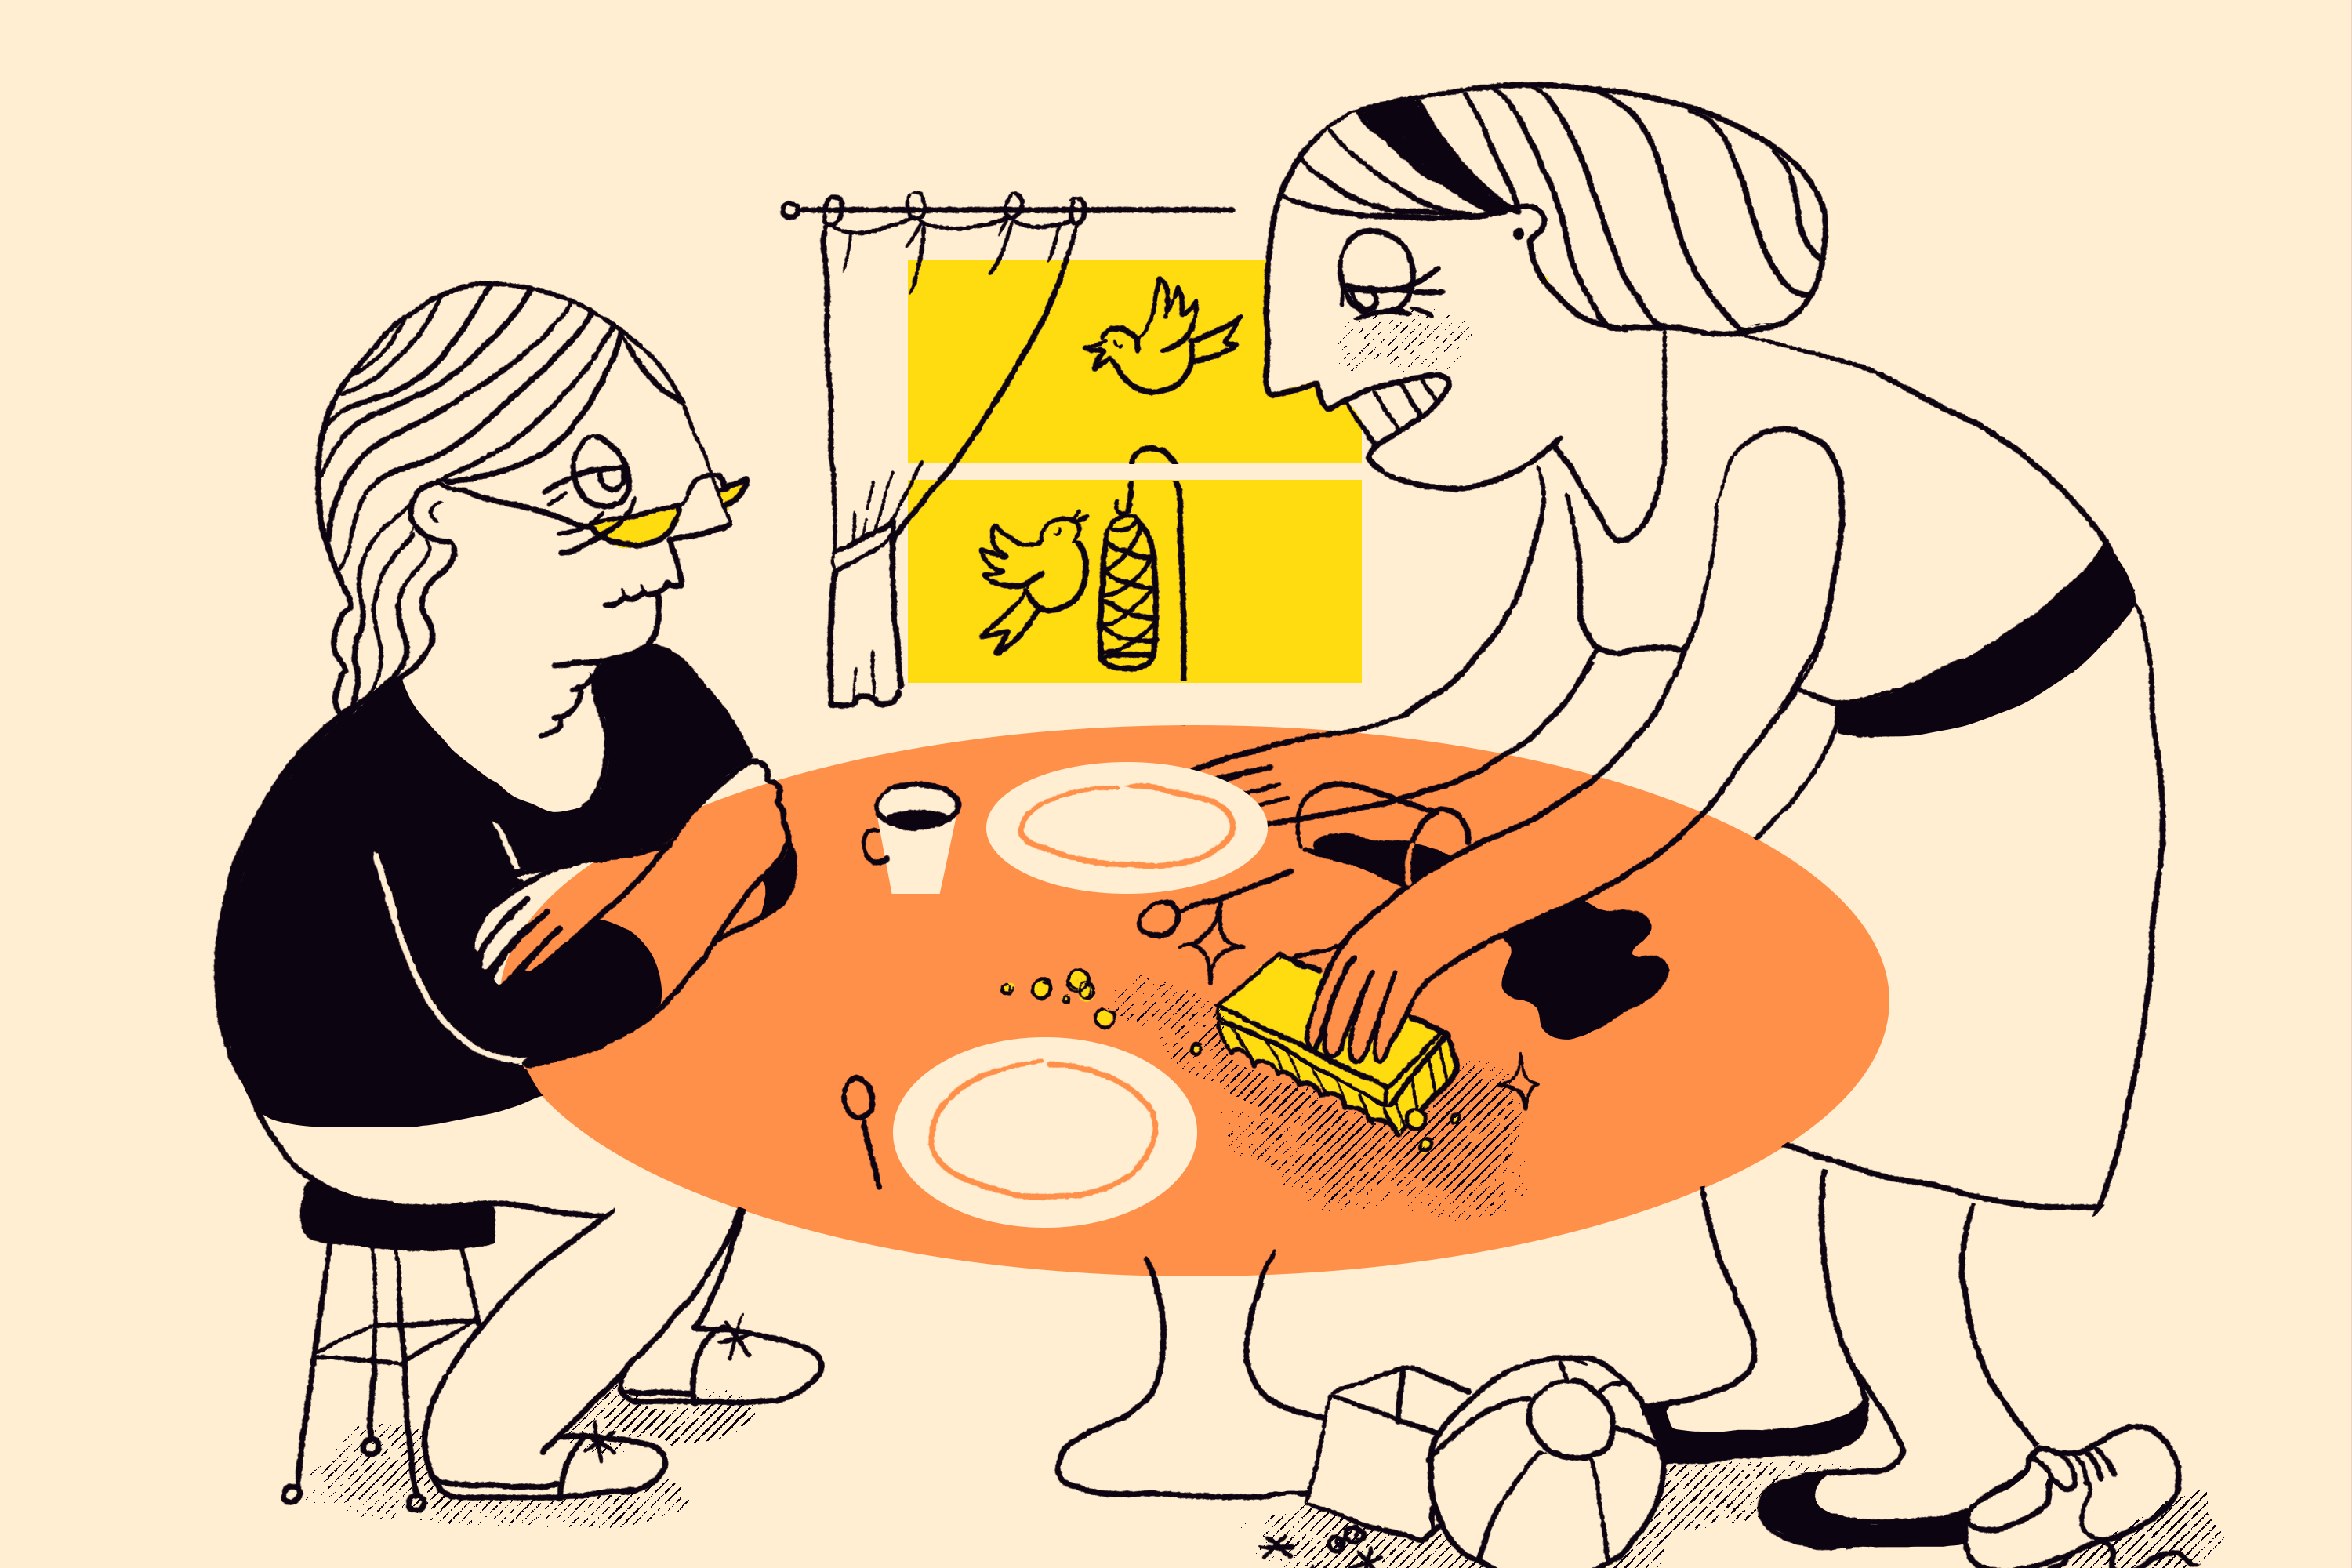 Illustration of a woman clearing off a kitchen table as her mom looks on sternly, sitting with her arms crossed. There are toys and shoes under the table and birds outside the window.